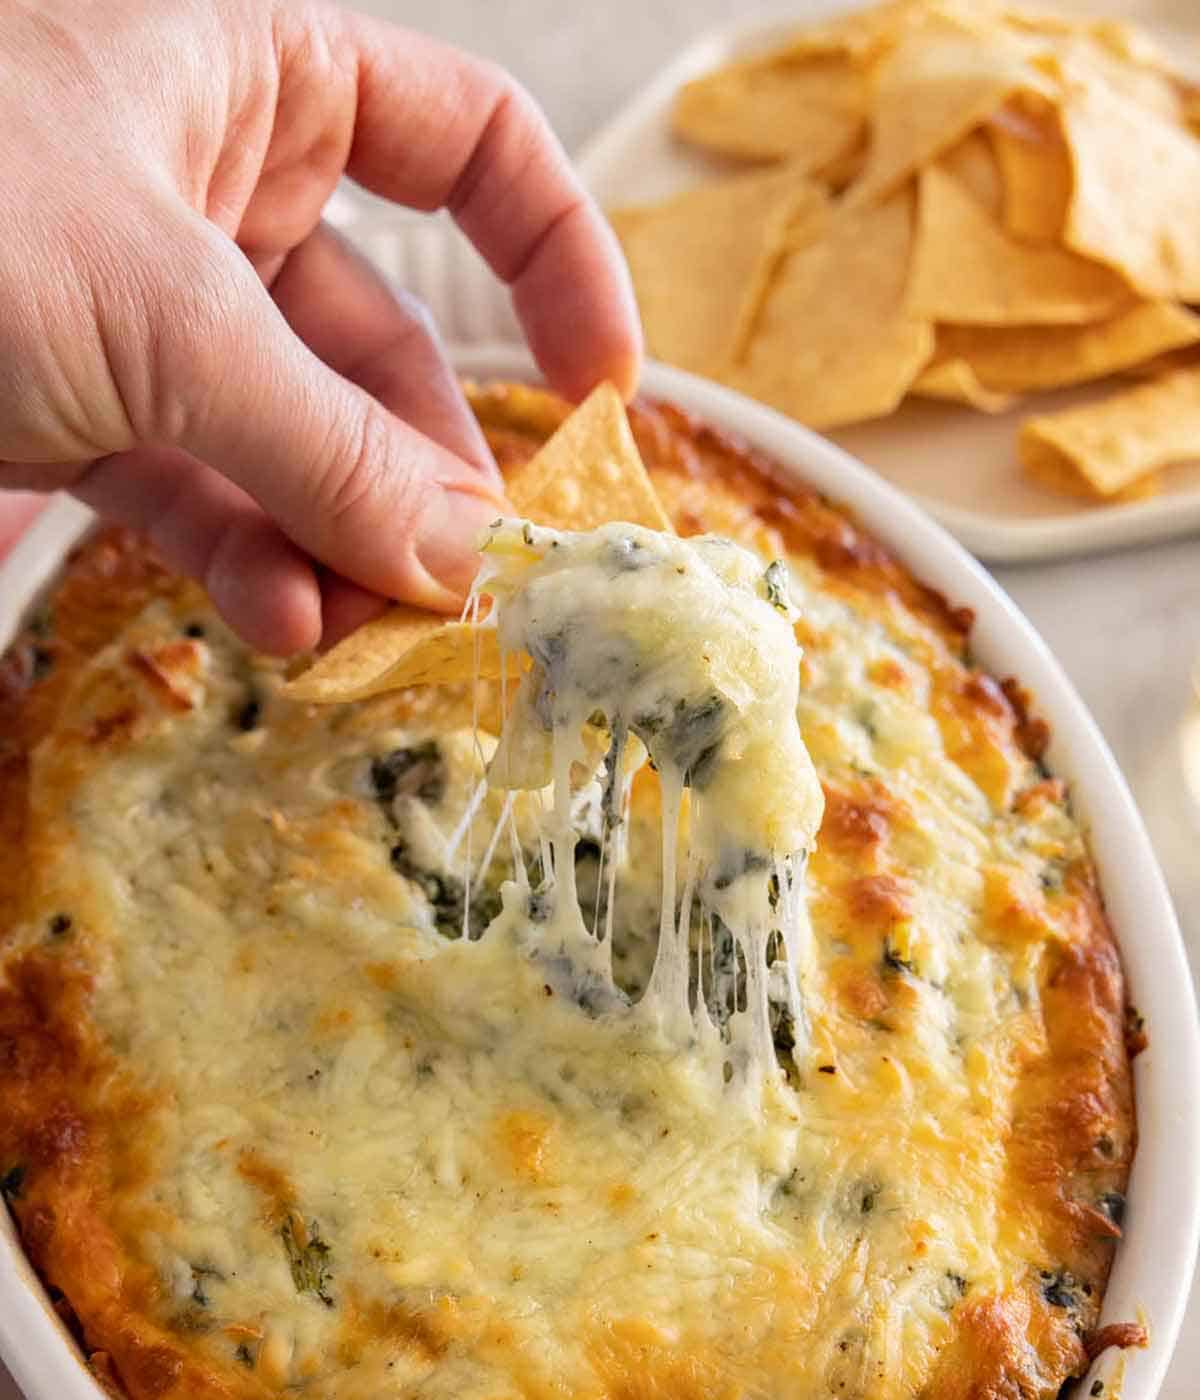 A chip scooping up freshly baked spinach artichoke dip with melty cheese.